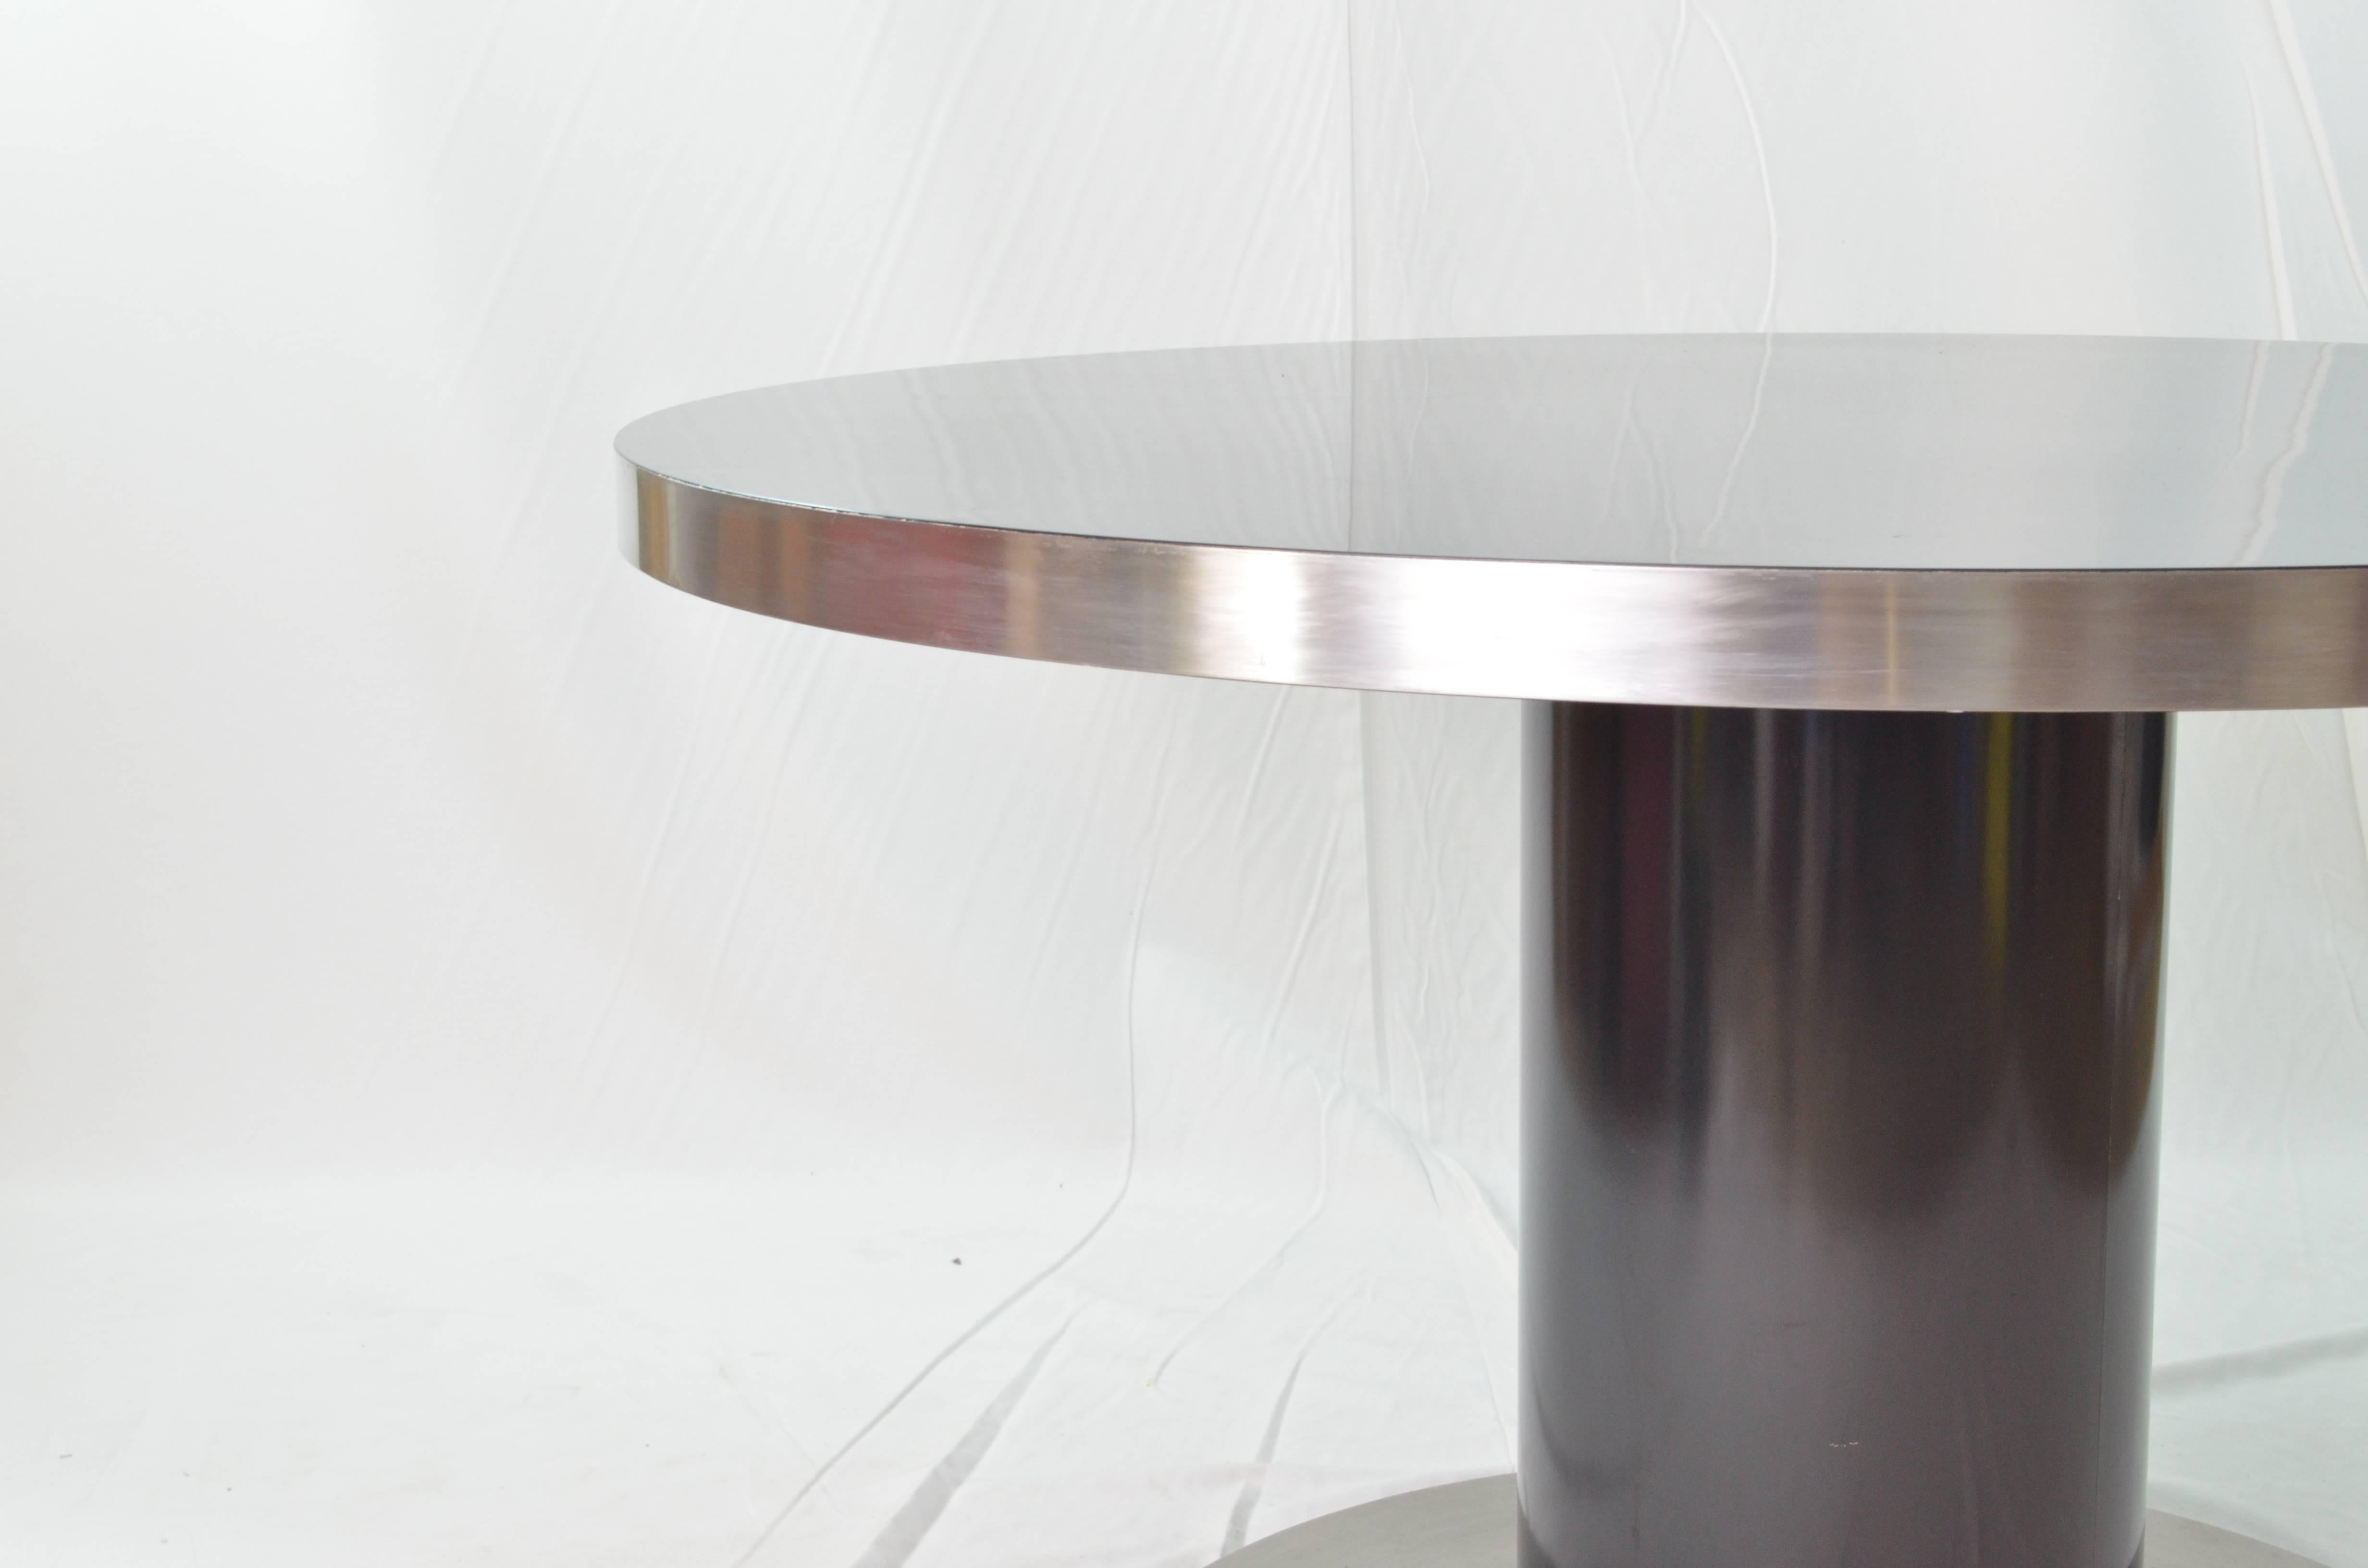 Rounded top, rounded central leg, rounded steel plate foot. This table is clearly Willy Rizzo creations from 1970s designed by Mario Sabot.
The tabletop is black lacquered wood and it is lined with a steel rounded ring. The visual impact is so